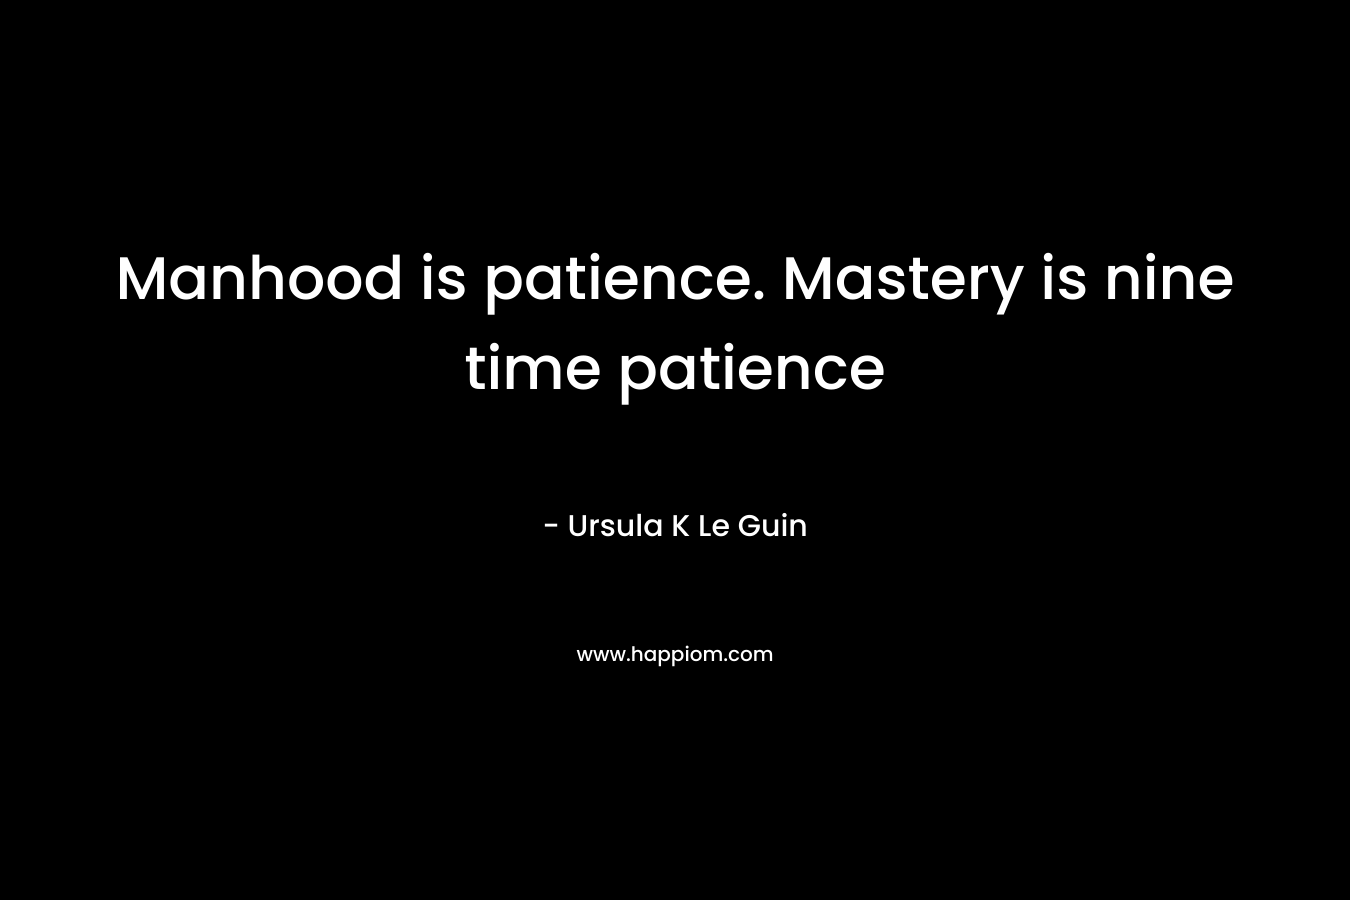 Manhood is patience. Mastery is nine time patience